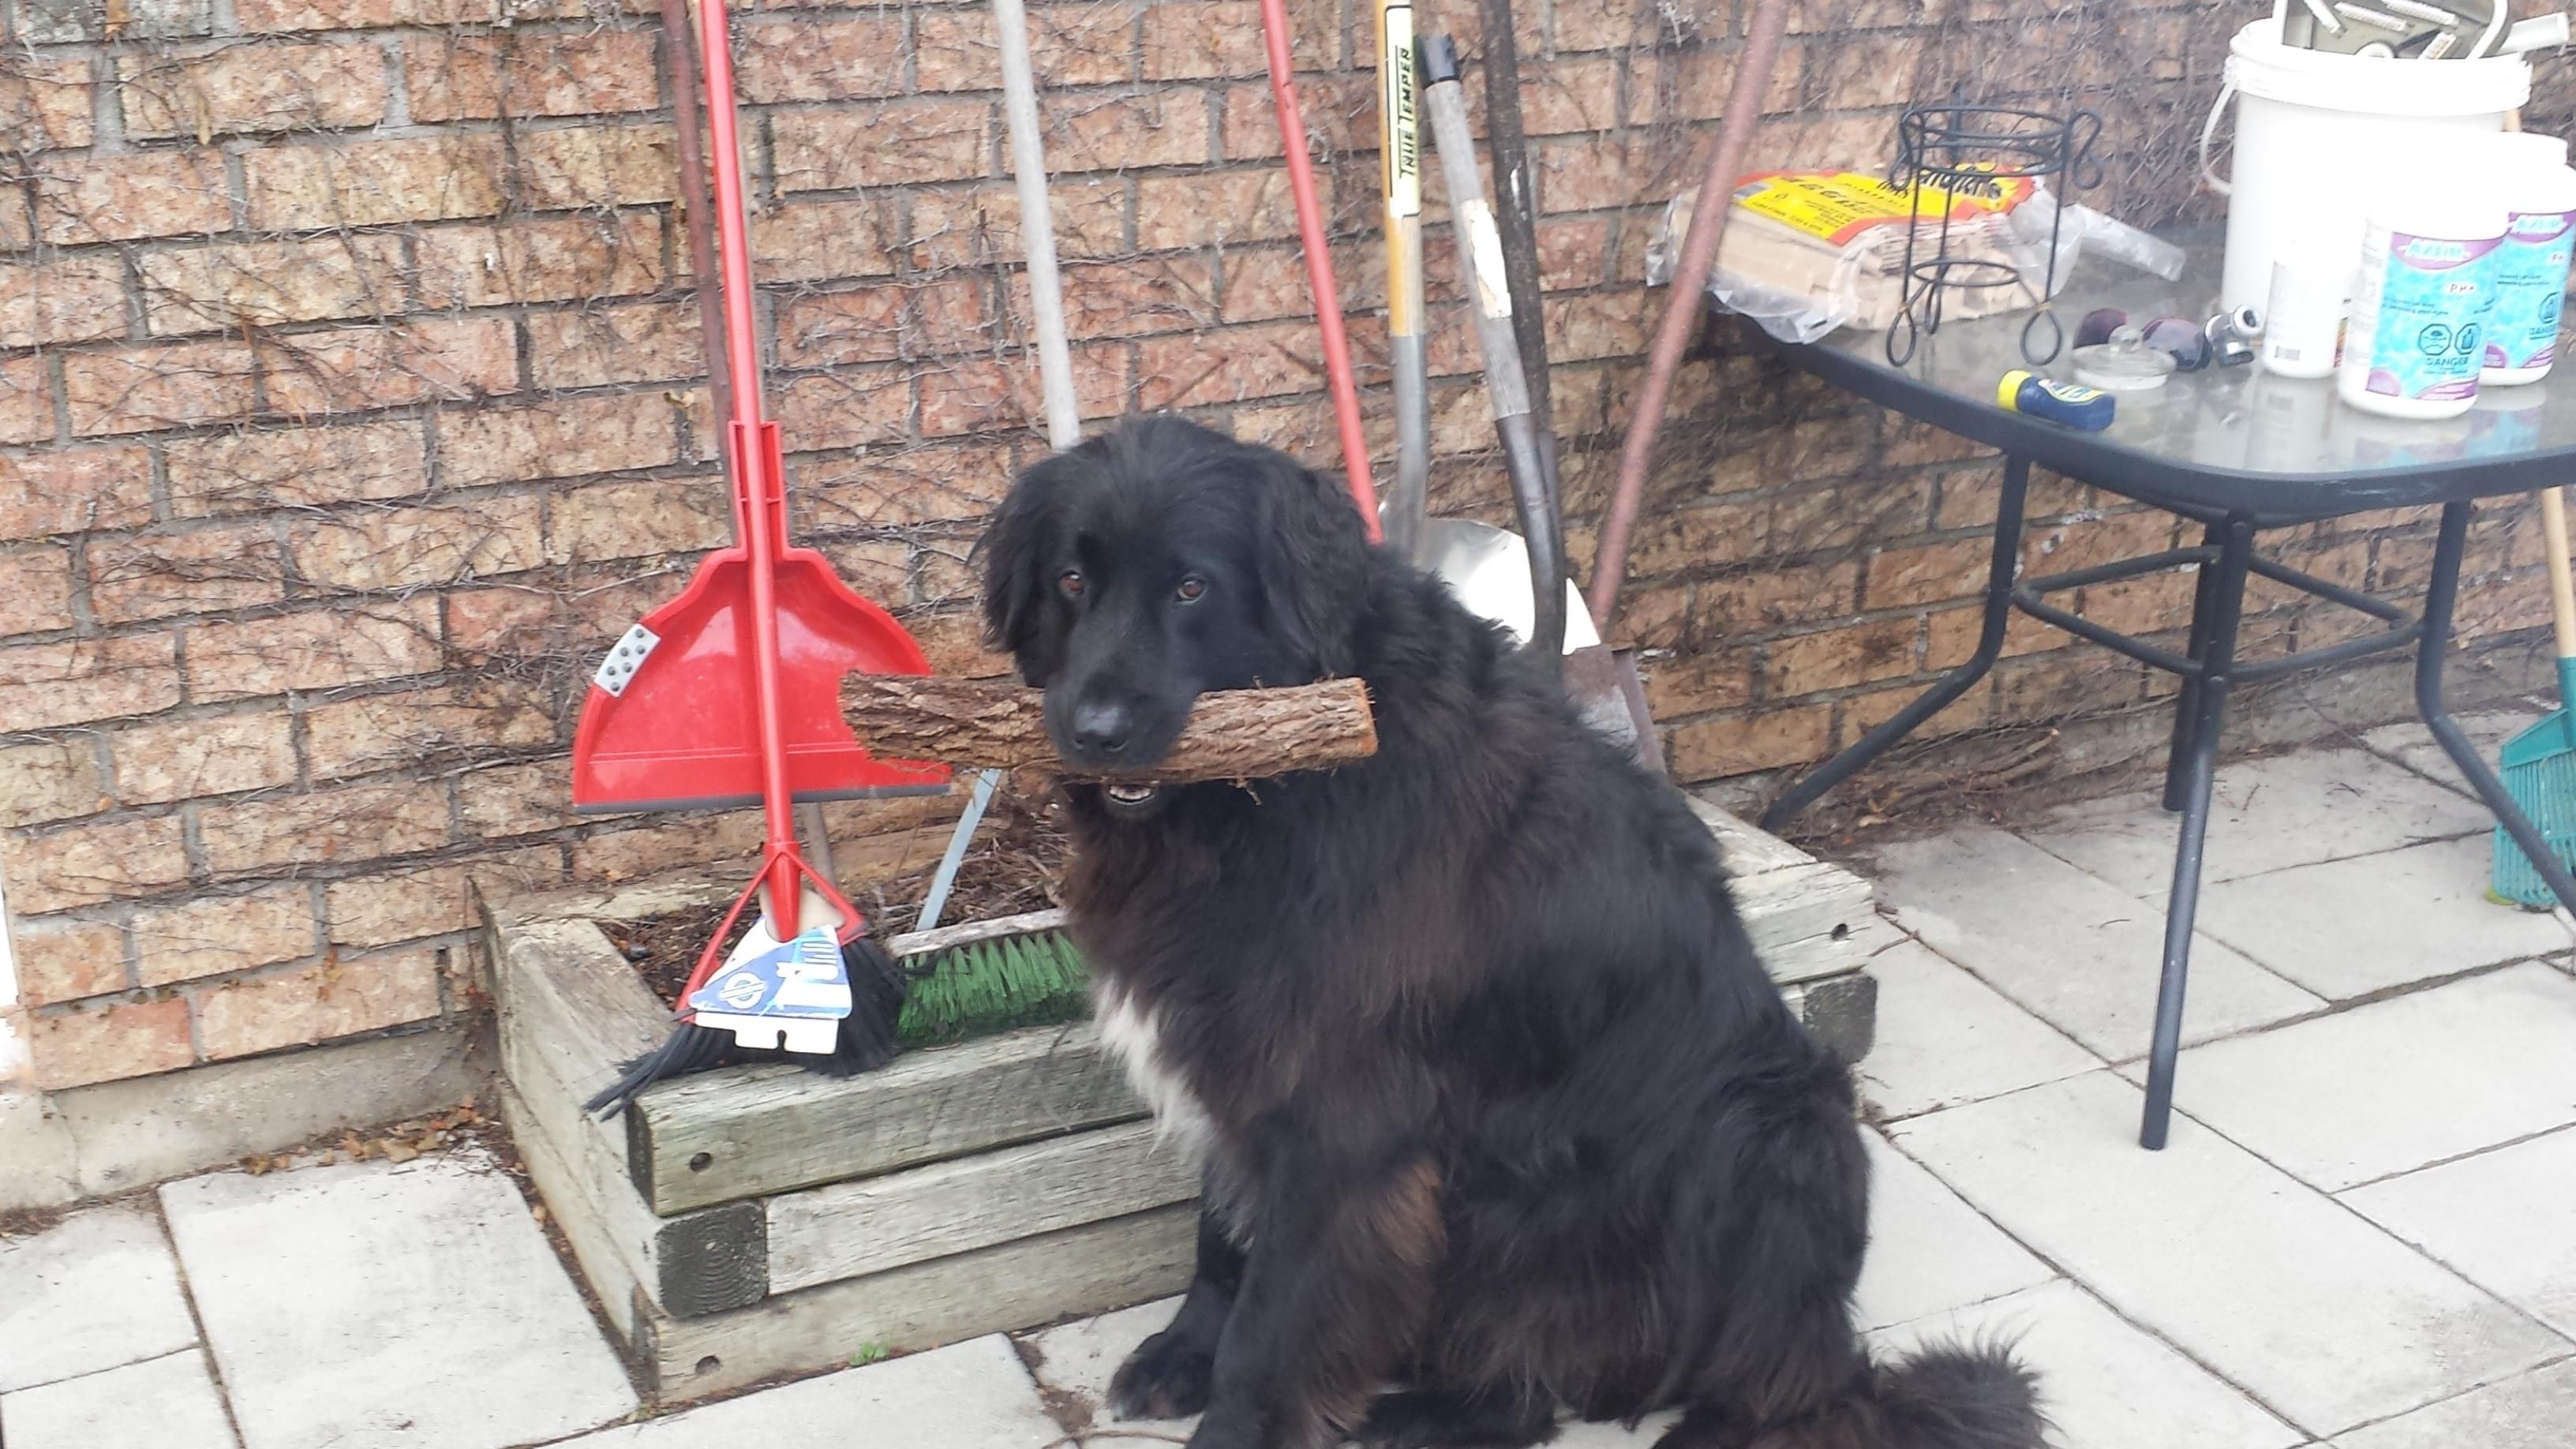 This is Ben. He doesn't know what the Telecom Lobby is but he is a good boy who likes to carry logs.